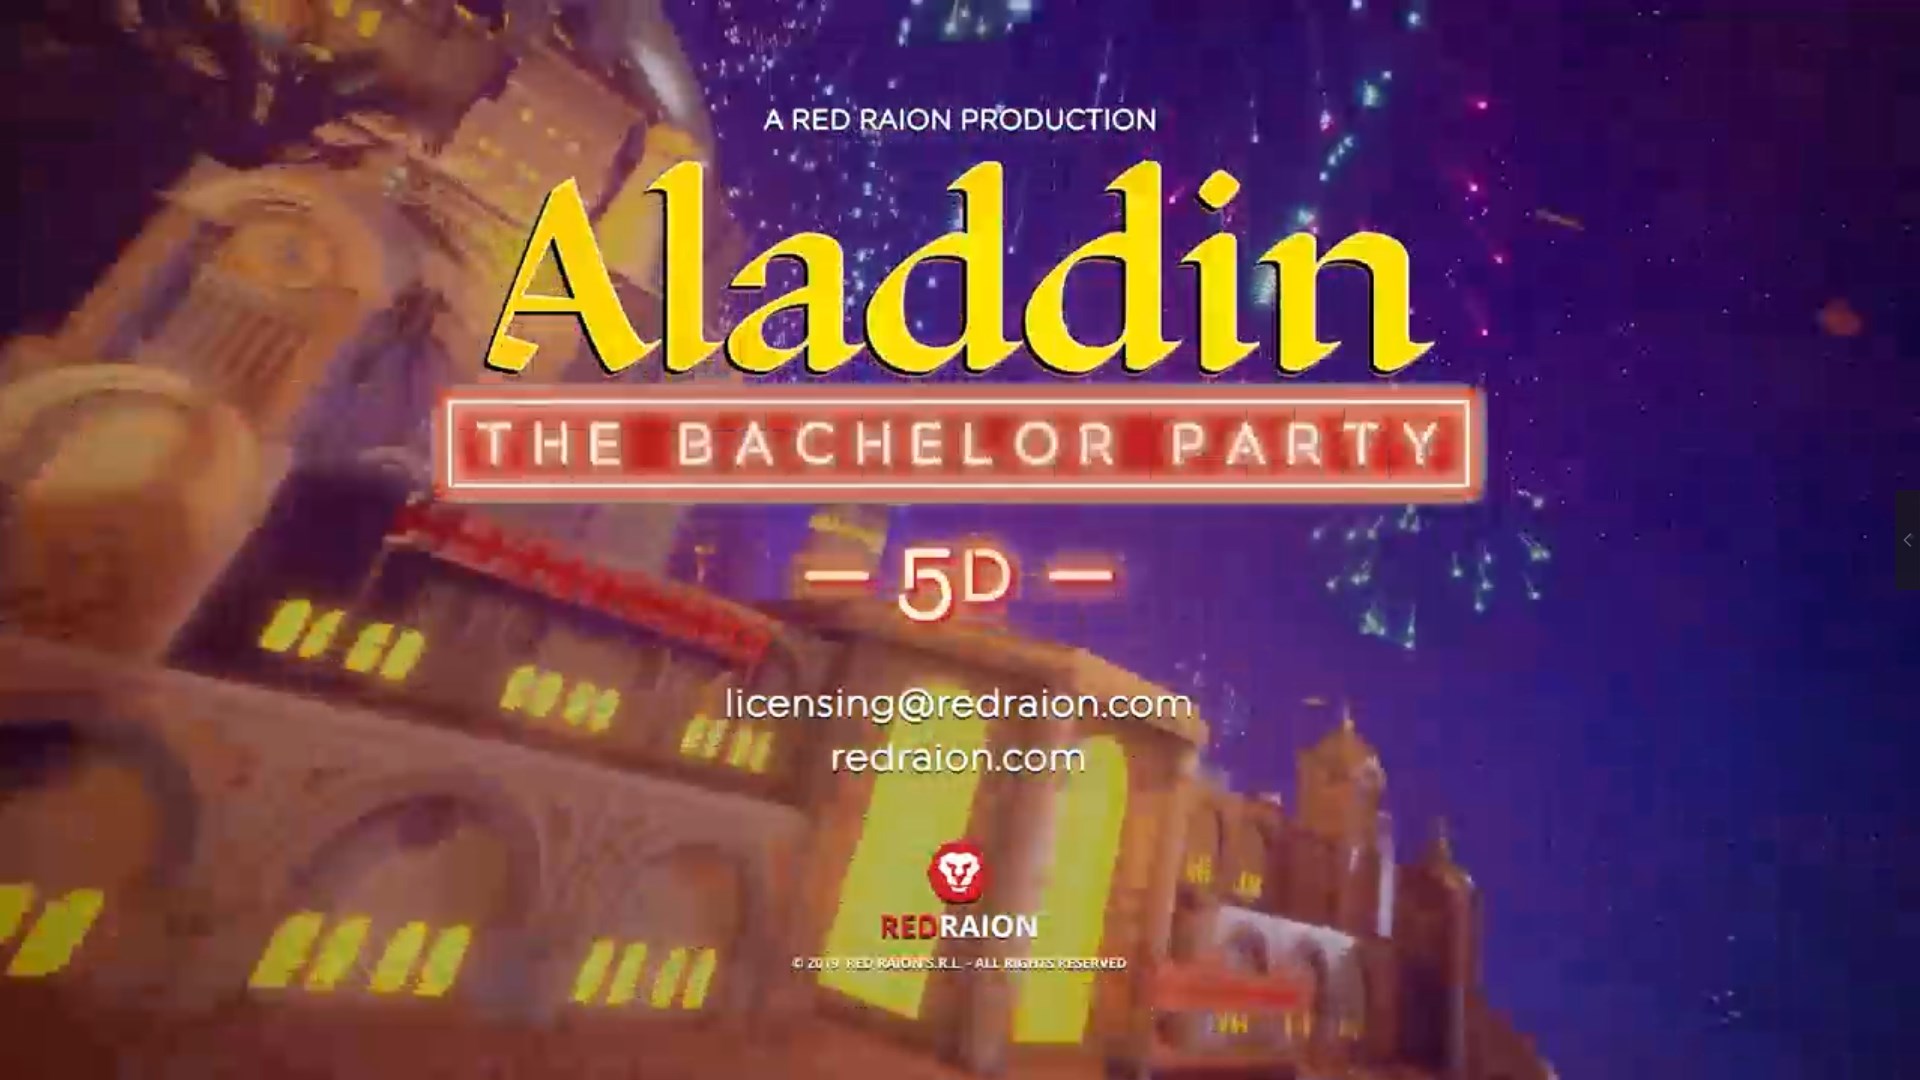 Disney Joint Hot VR Game Aladdin released - News - 2